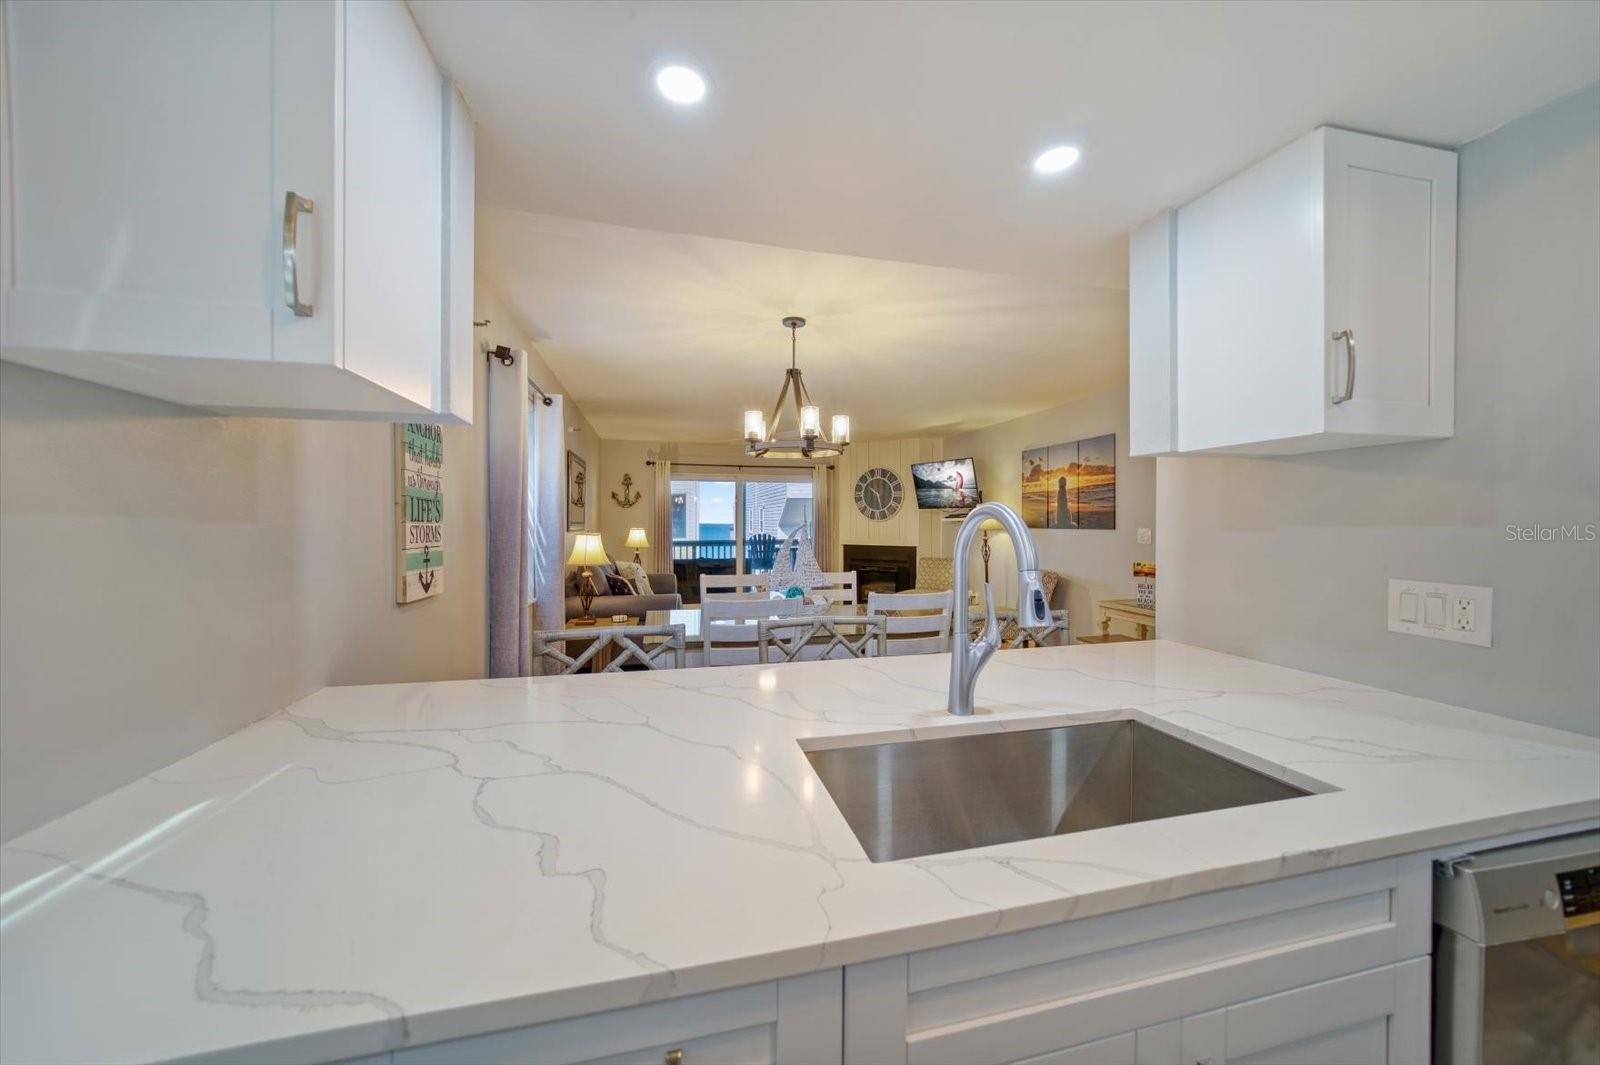 Quartz countertops and all soft close cabinets / drawers